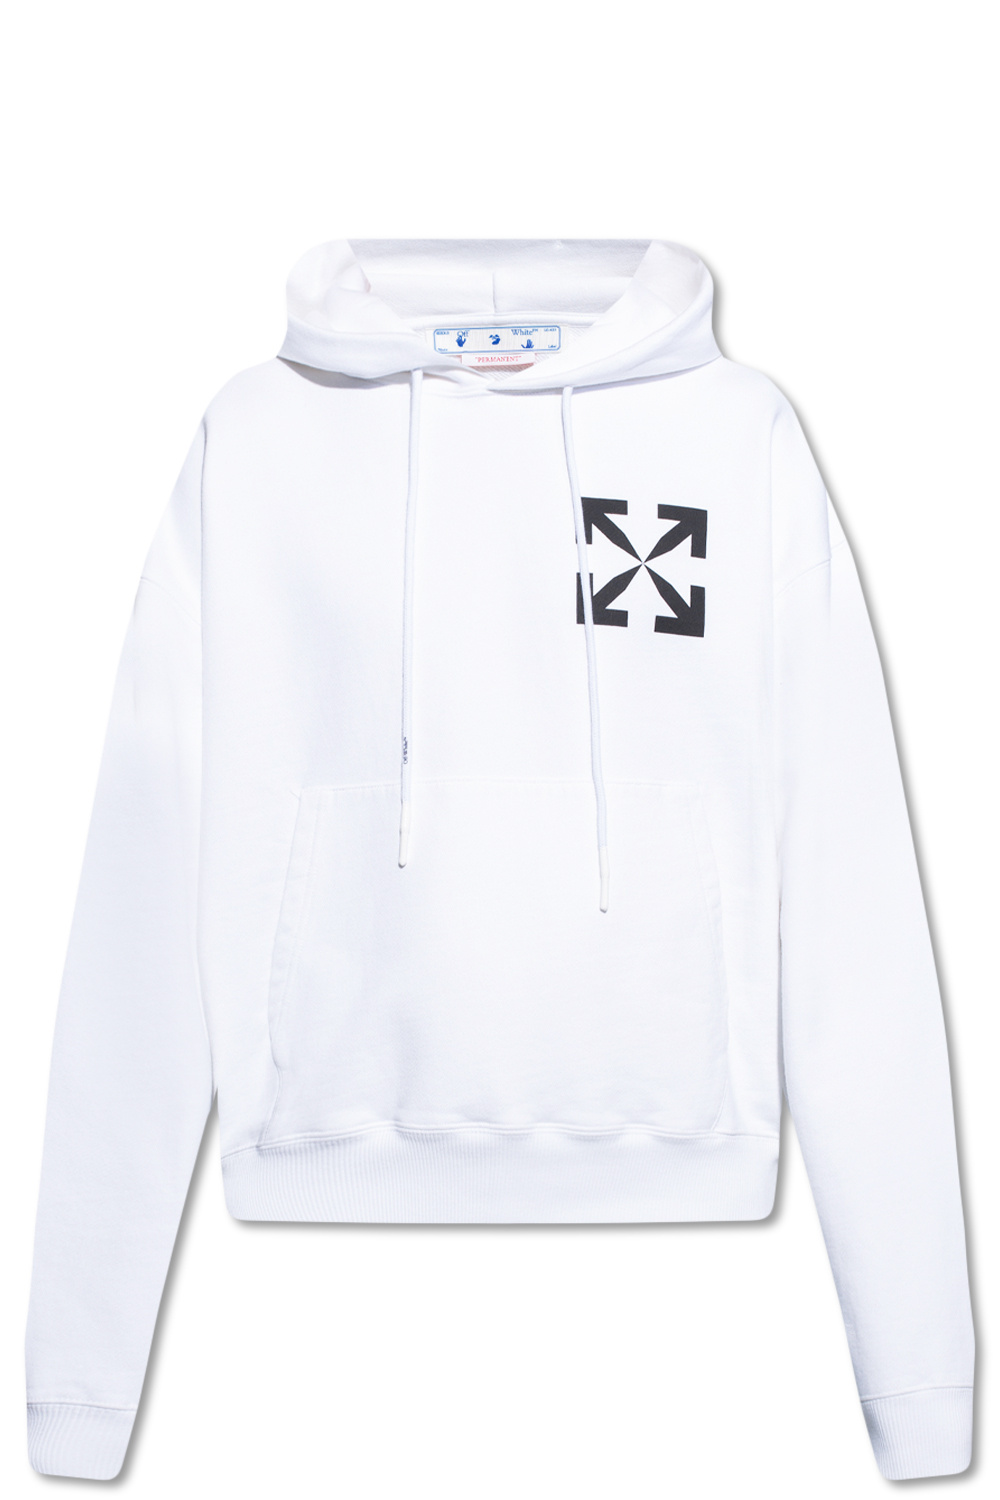 Off-White hoodie see with logo